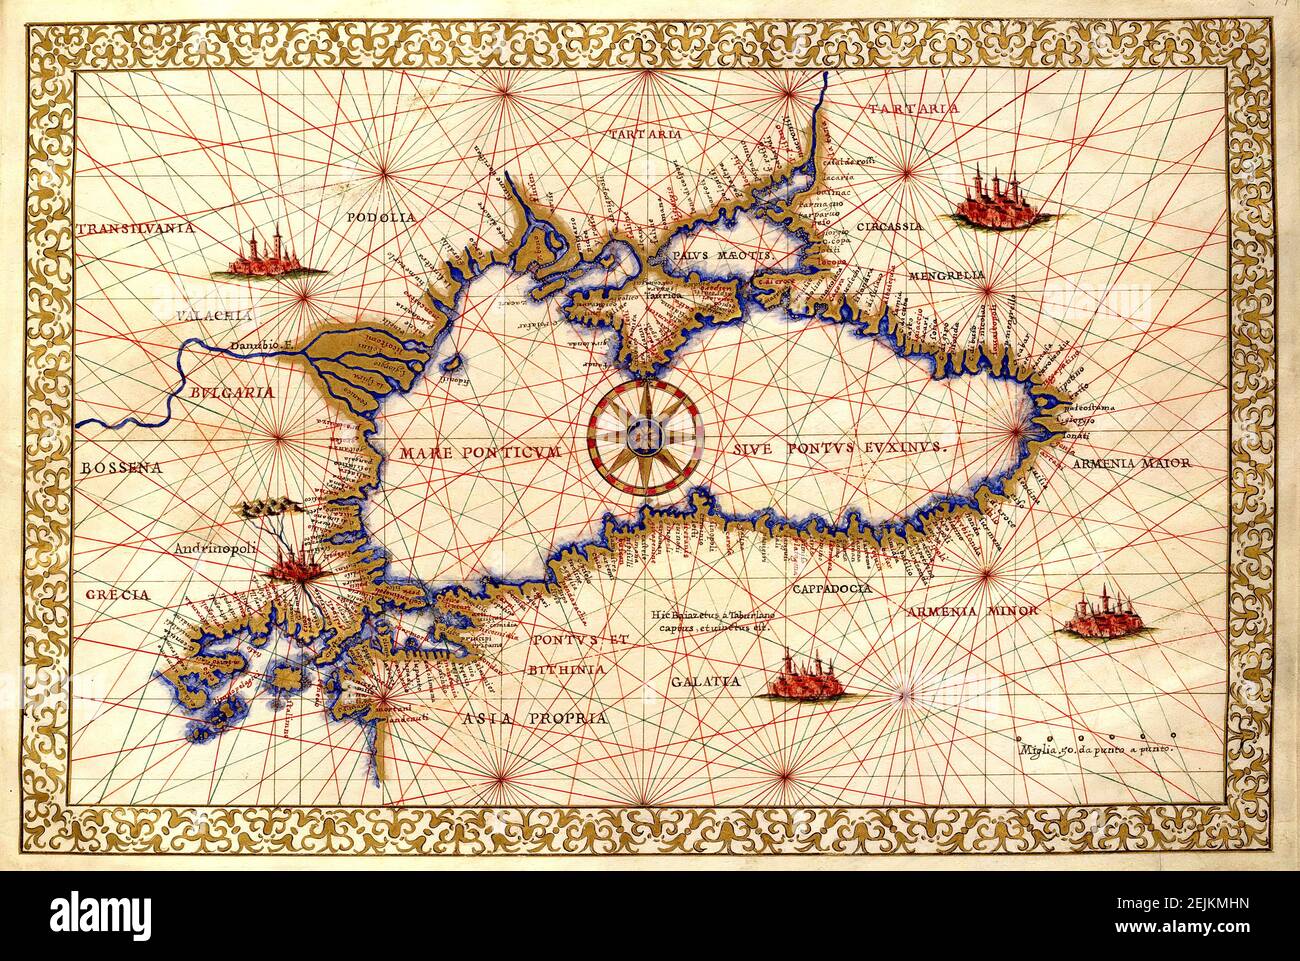 Map of the Black Sea region in the Southeastern Europe. Map was published by Francesco Ghisolfi (1533-1560). Stock Photo